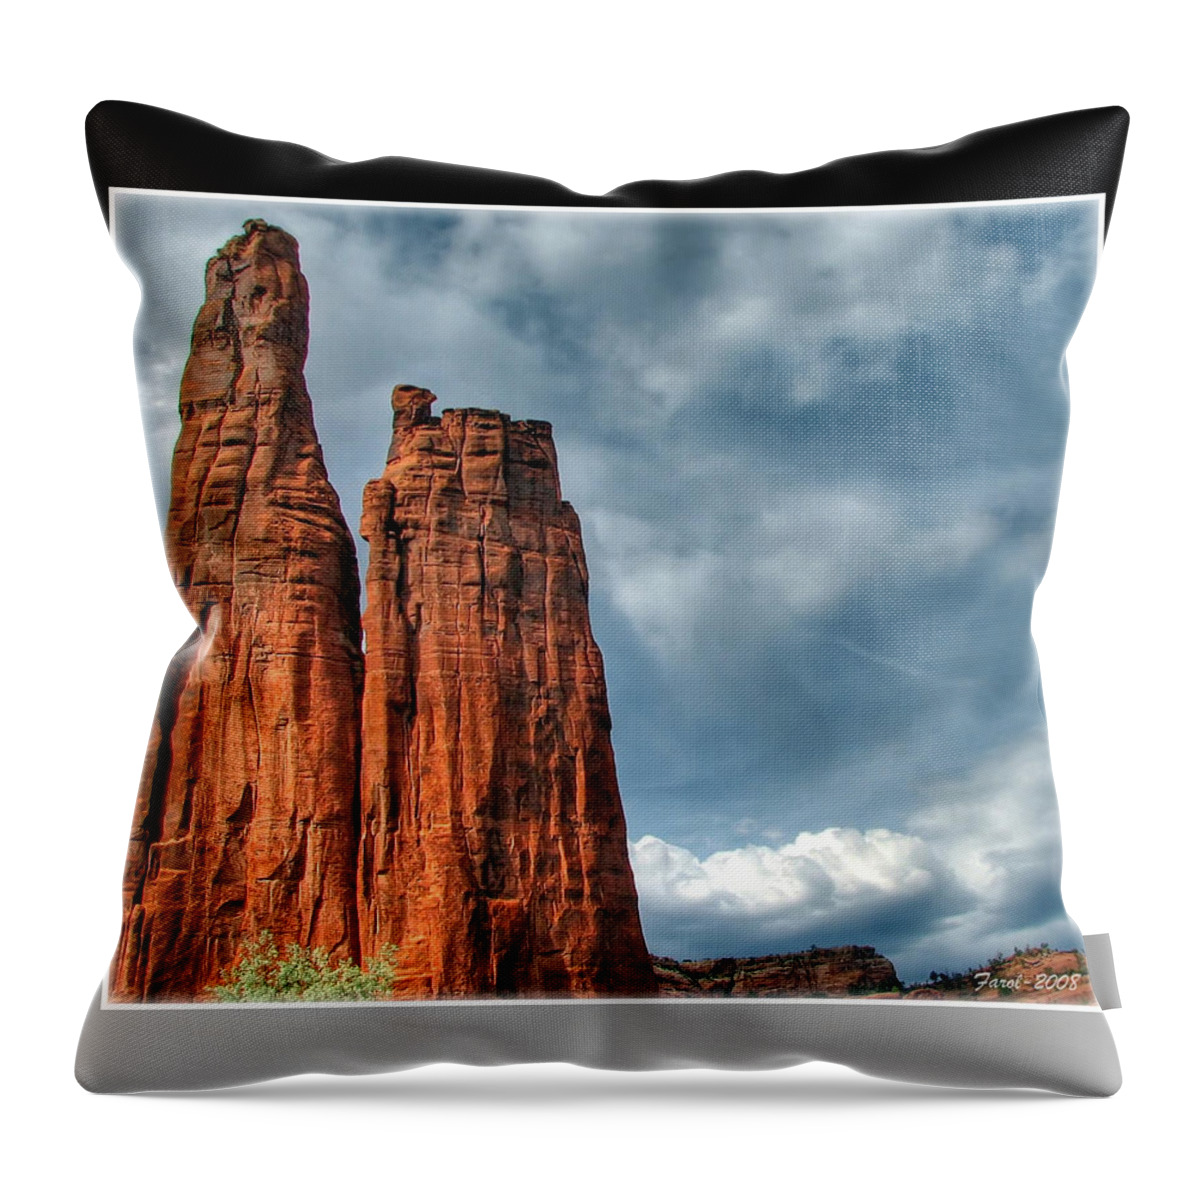 Spider Rock Throw Pillow featuring the photograph Spider Rock by Farol Tomson